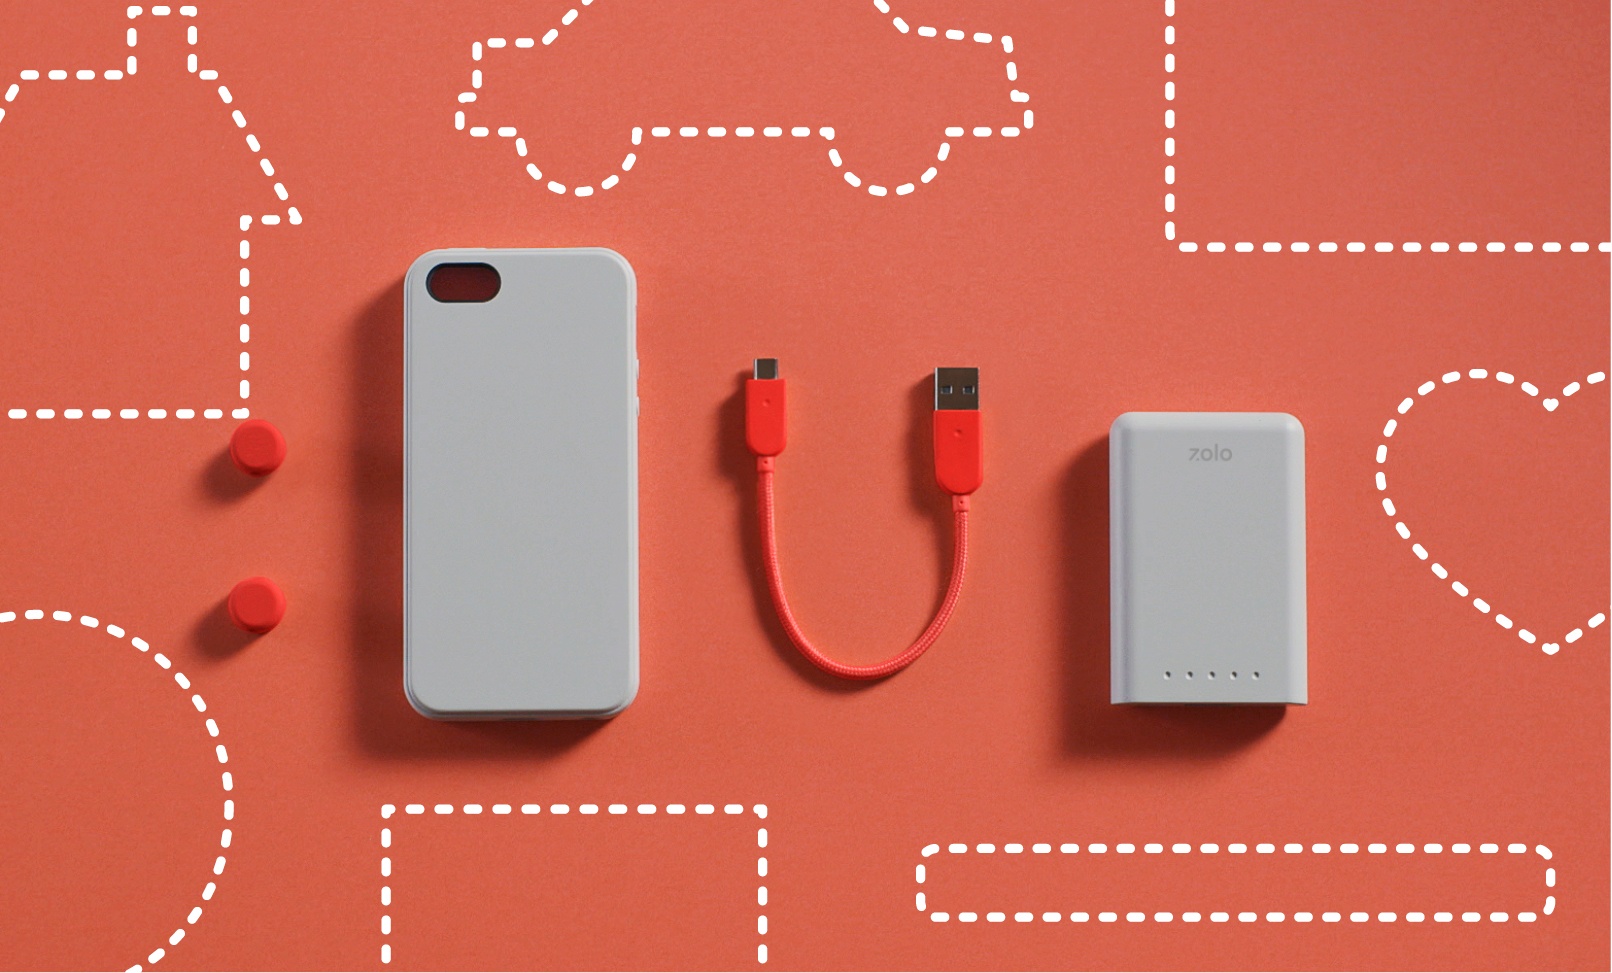 The Zolo System Uses Powerful Magnets To Keep Your Device Encased And Running